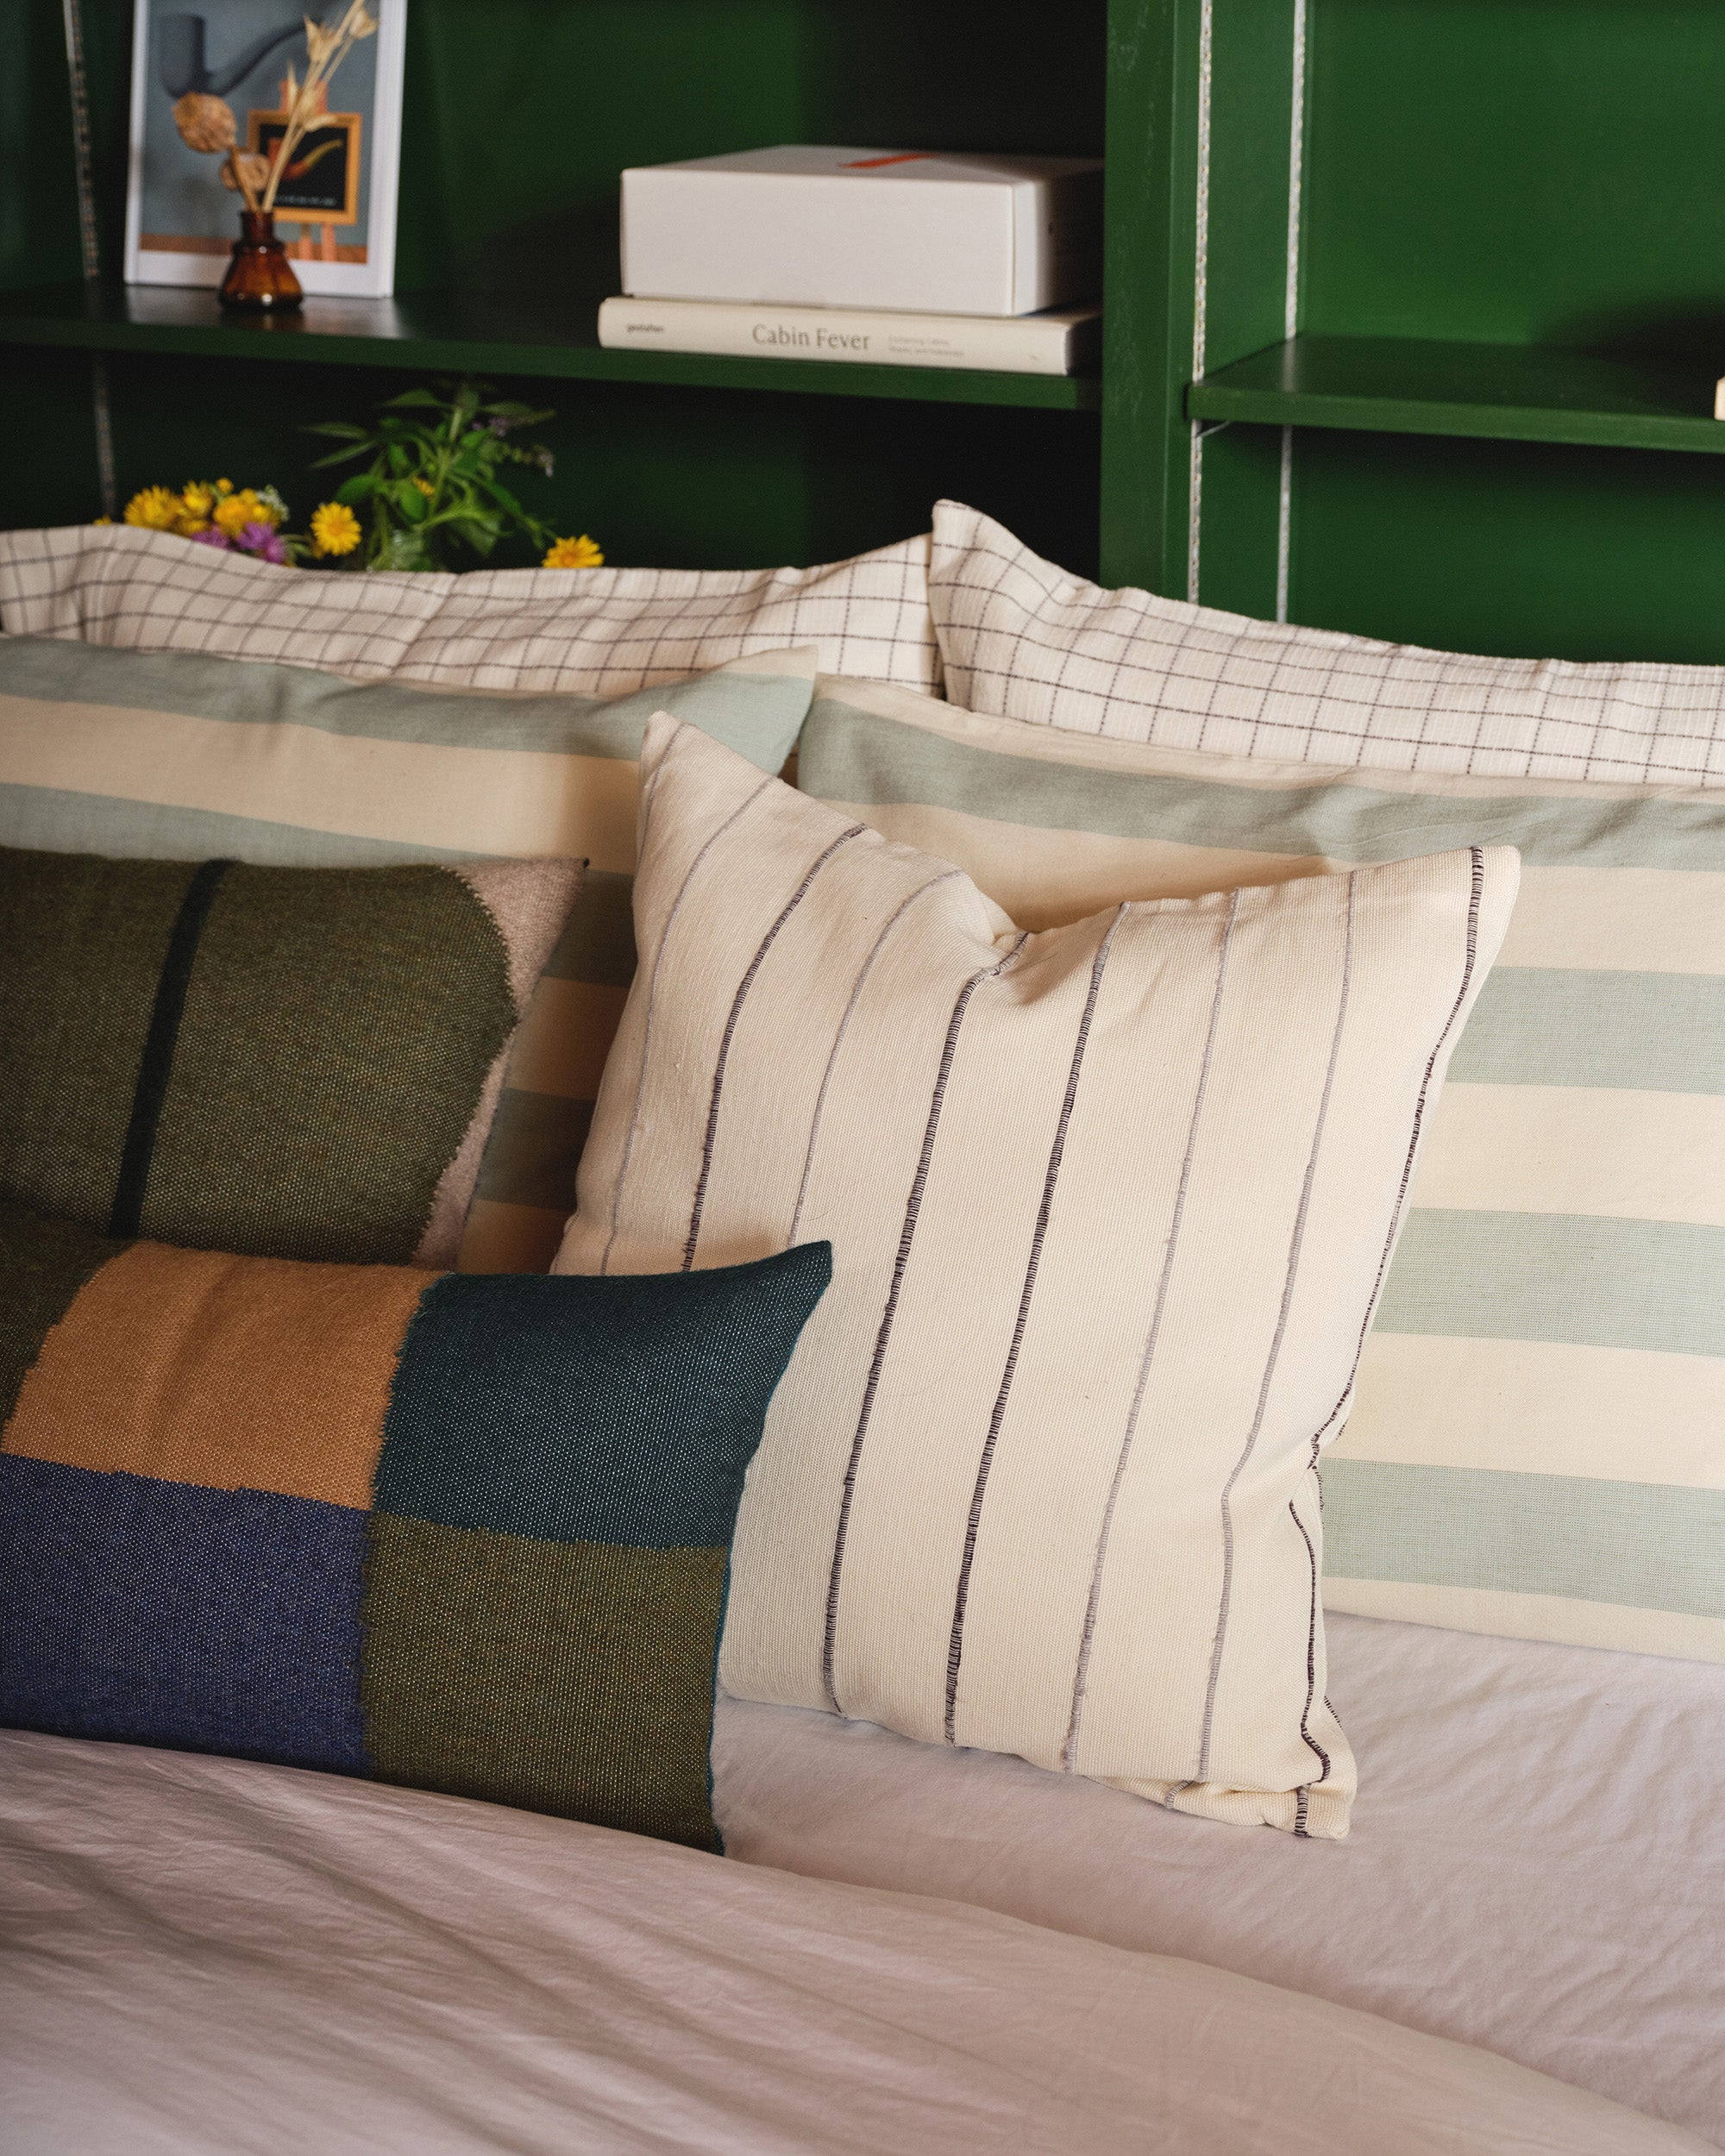 Ethically handwoven decorative throw pillows on a guest bed. MINNA patchwork and julie pillow in Hunter.